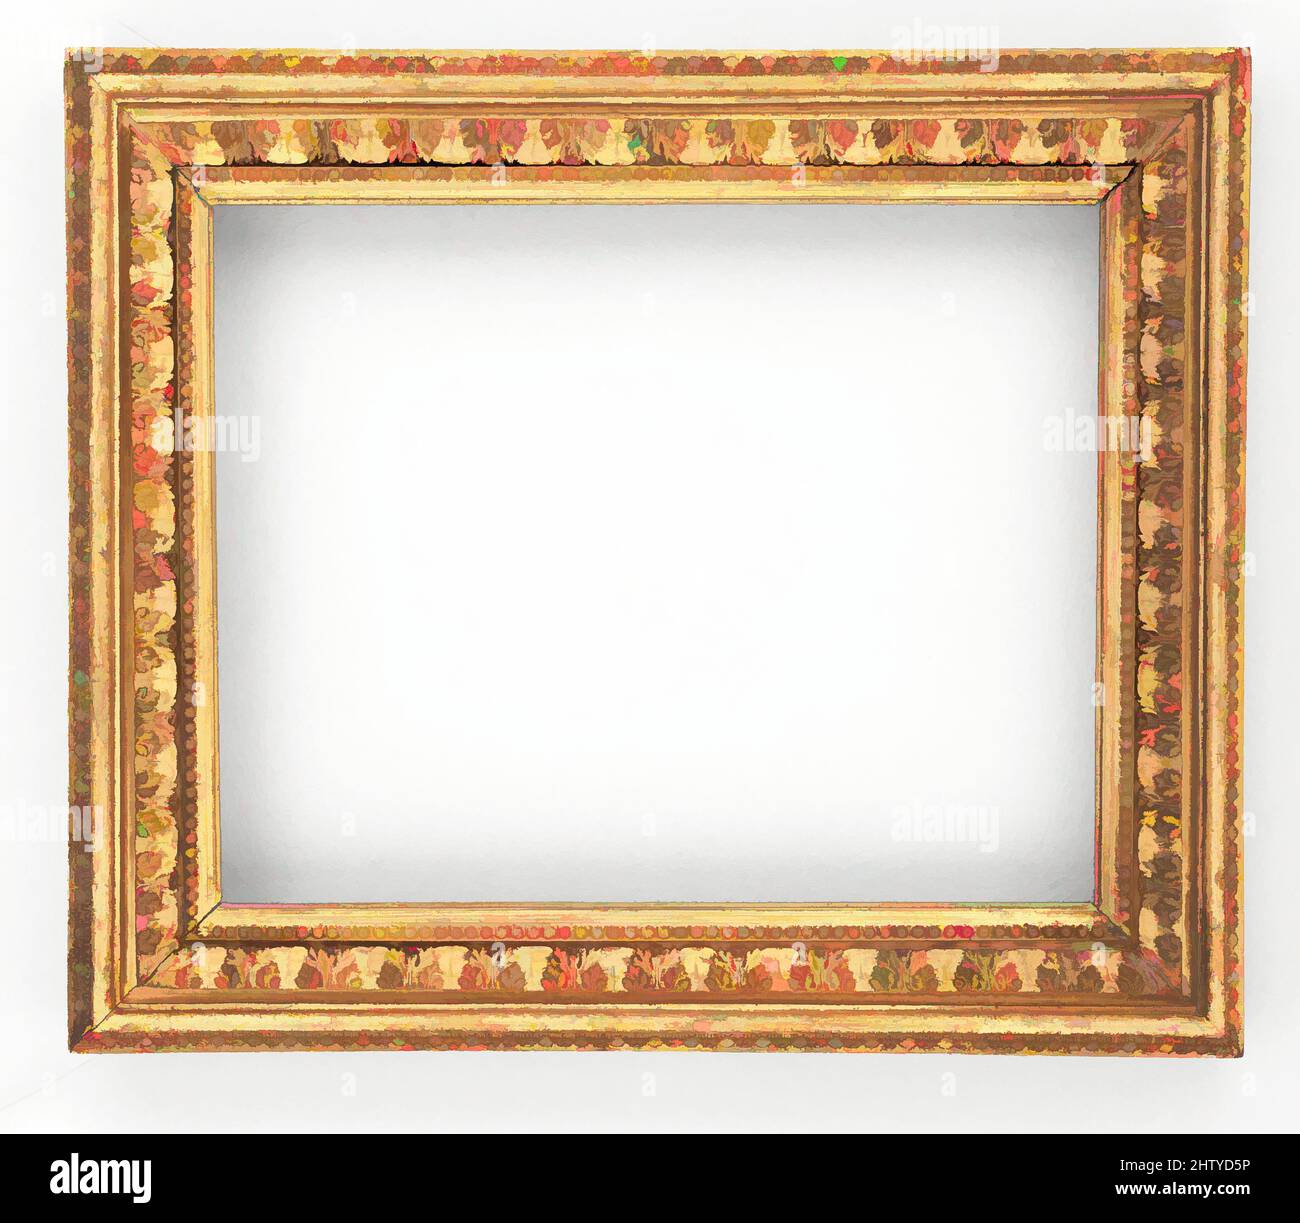 Art inspired by Frame, ca. 1680–1700, Poplar, Overall: 19 1/2 x 22 7/8 in. (49.5 x 58.1 cm); Sight: 131/2 x 17 in. (34.3 x 43.2 cm.); Rabbet: 14 3/8 x 17 7/8 in. (36.5 x 45.4 cm.), Frames, Italy (Rome) (late 17th century–early 18th century, Classic works modernized by Artotop with a splash of modernity. Shapes, color and value, eye-catching visual impact on art. Emotions through freedom of artworks in a contemporary way. A timeless message pursuing a wildly creative new direction. Artists turning to the digital medium and creating the Artotop NFT Stock Photo